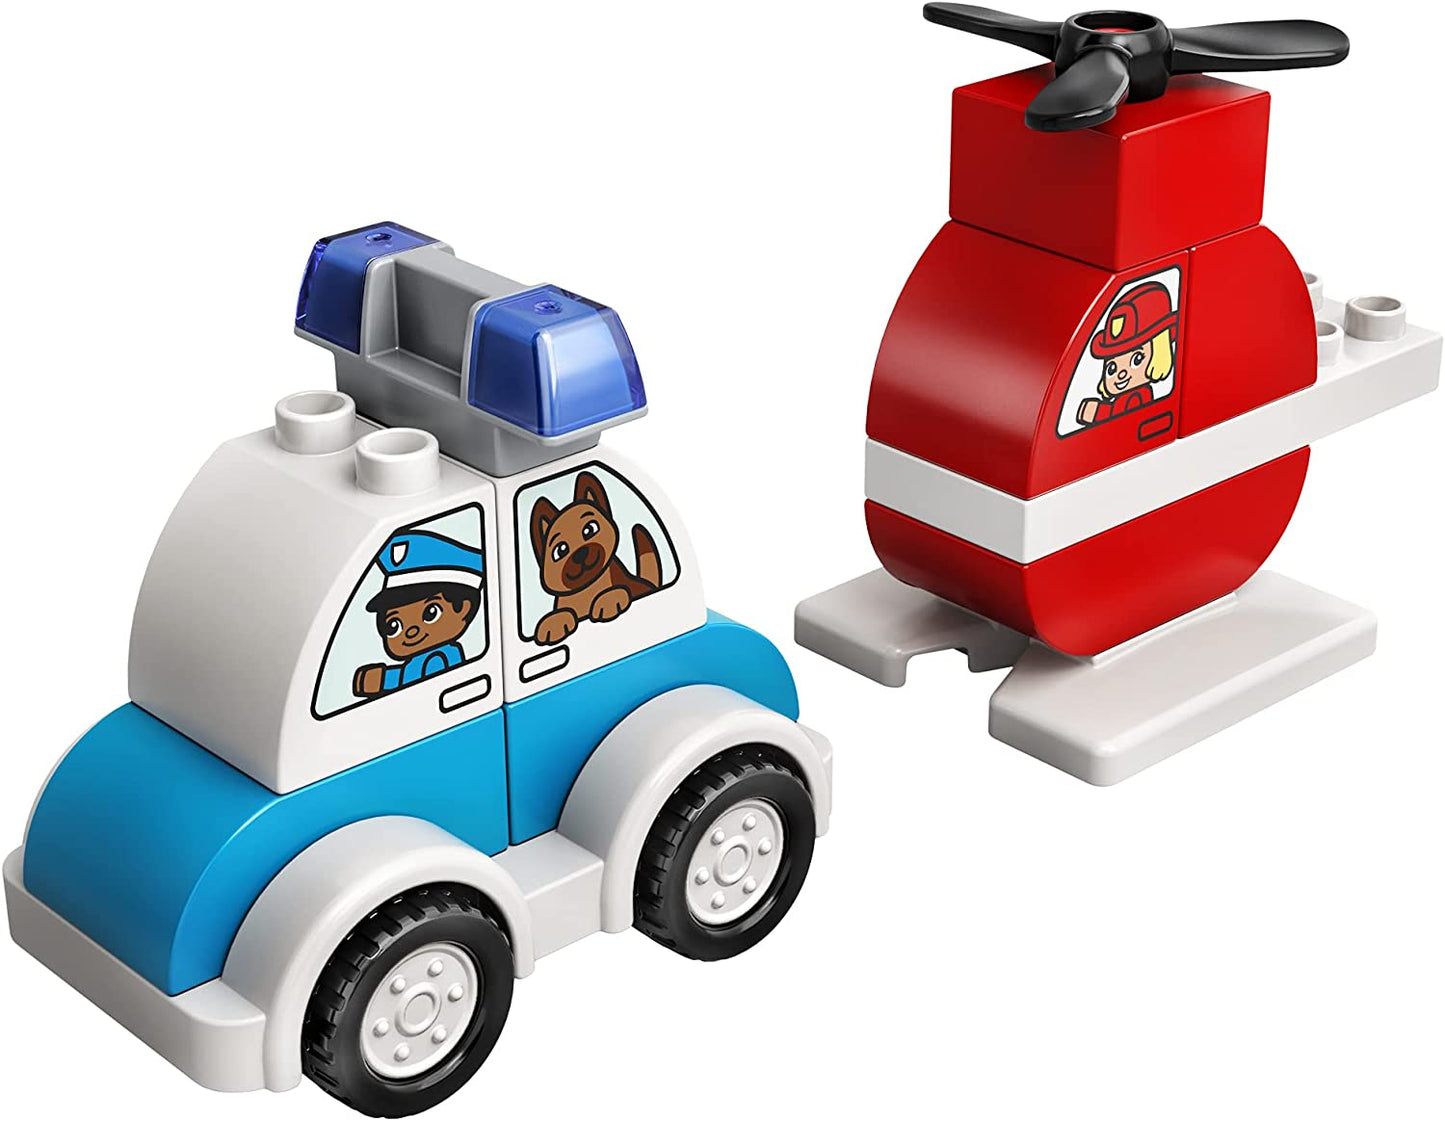 LEGO Duplo - Fire Helicopter and Police Car 10957